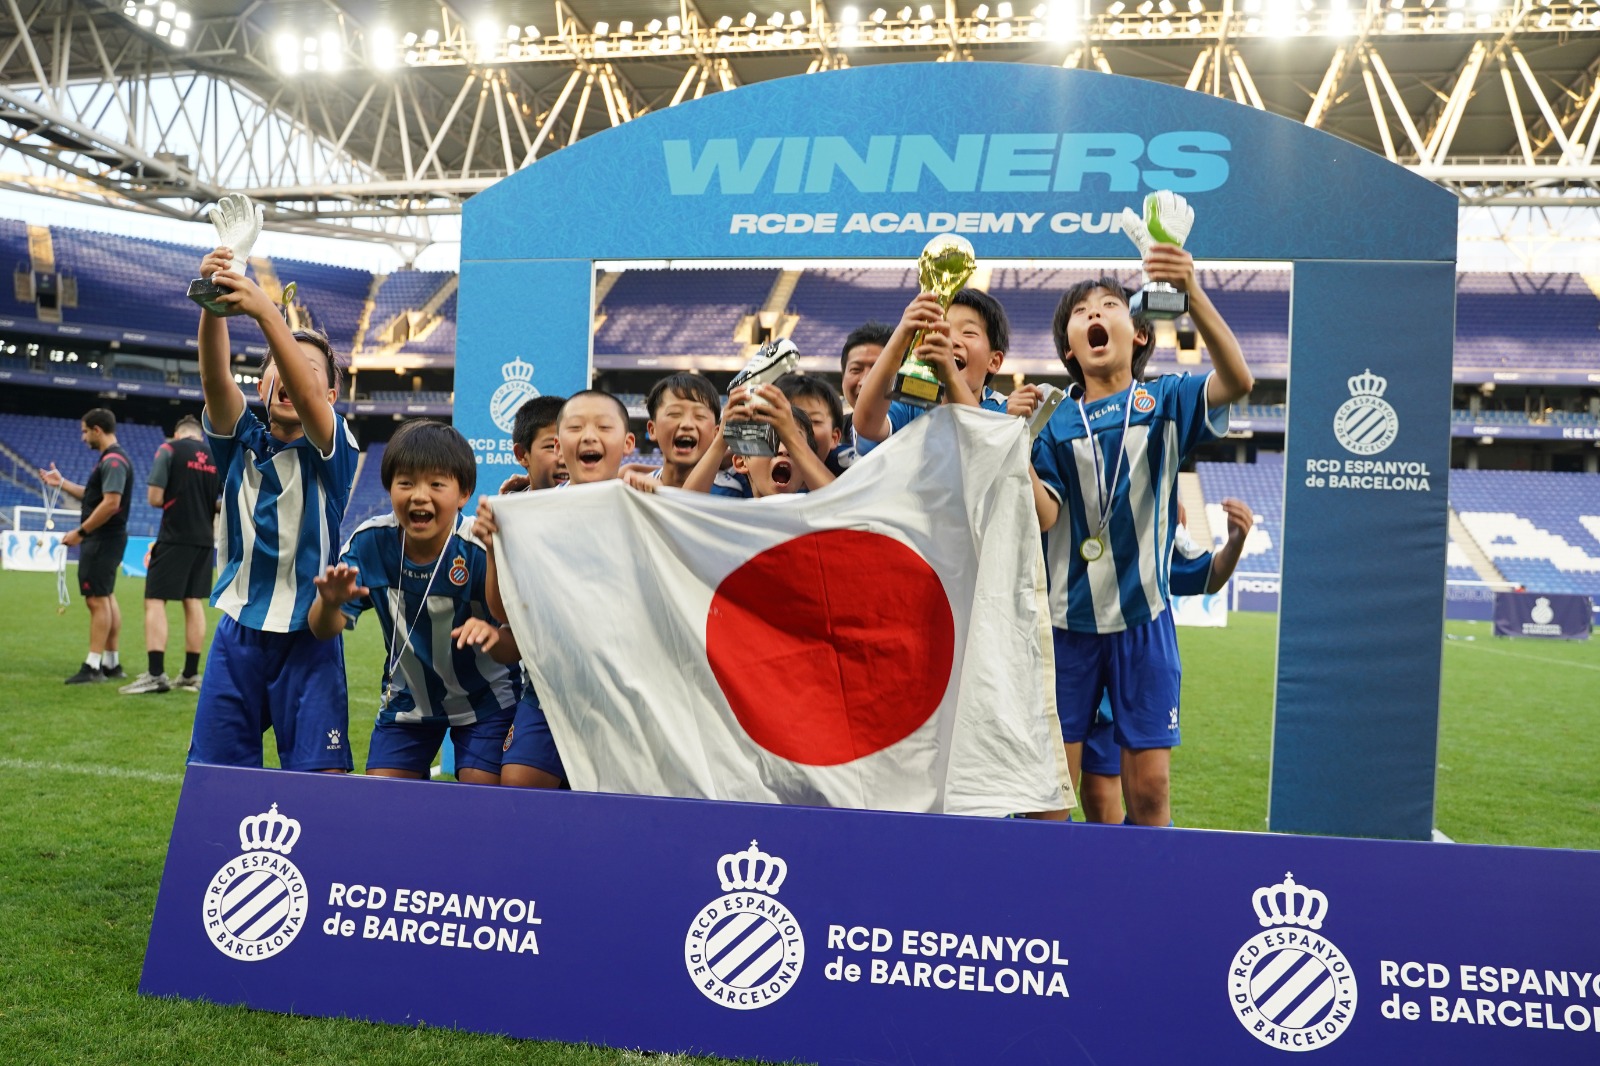 The academies of RCD Espanyol de Barcelona are now in every continent